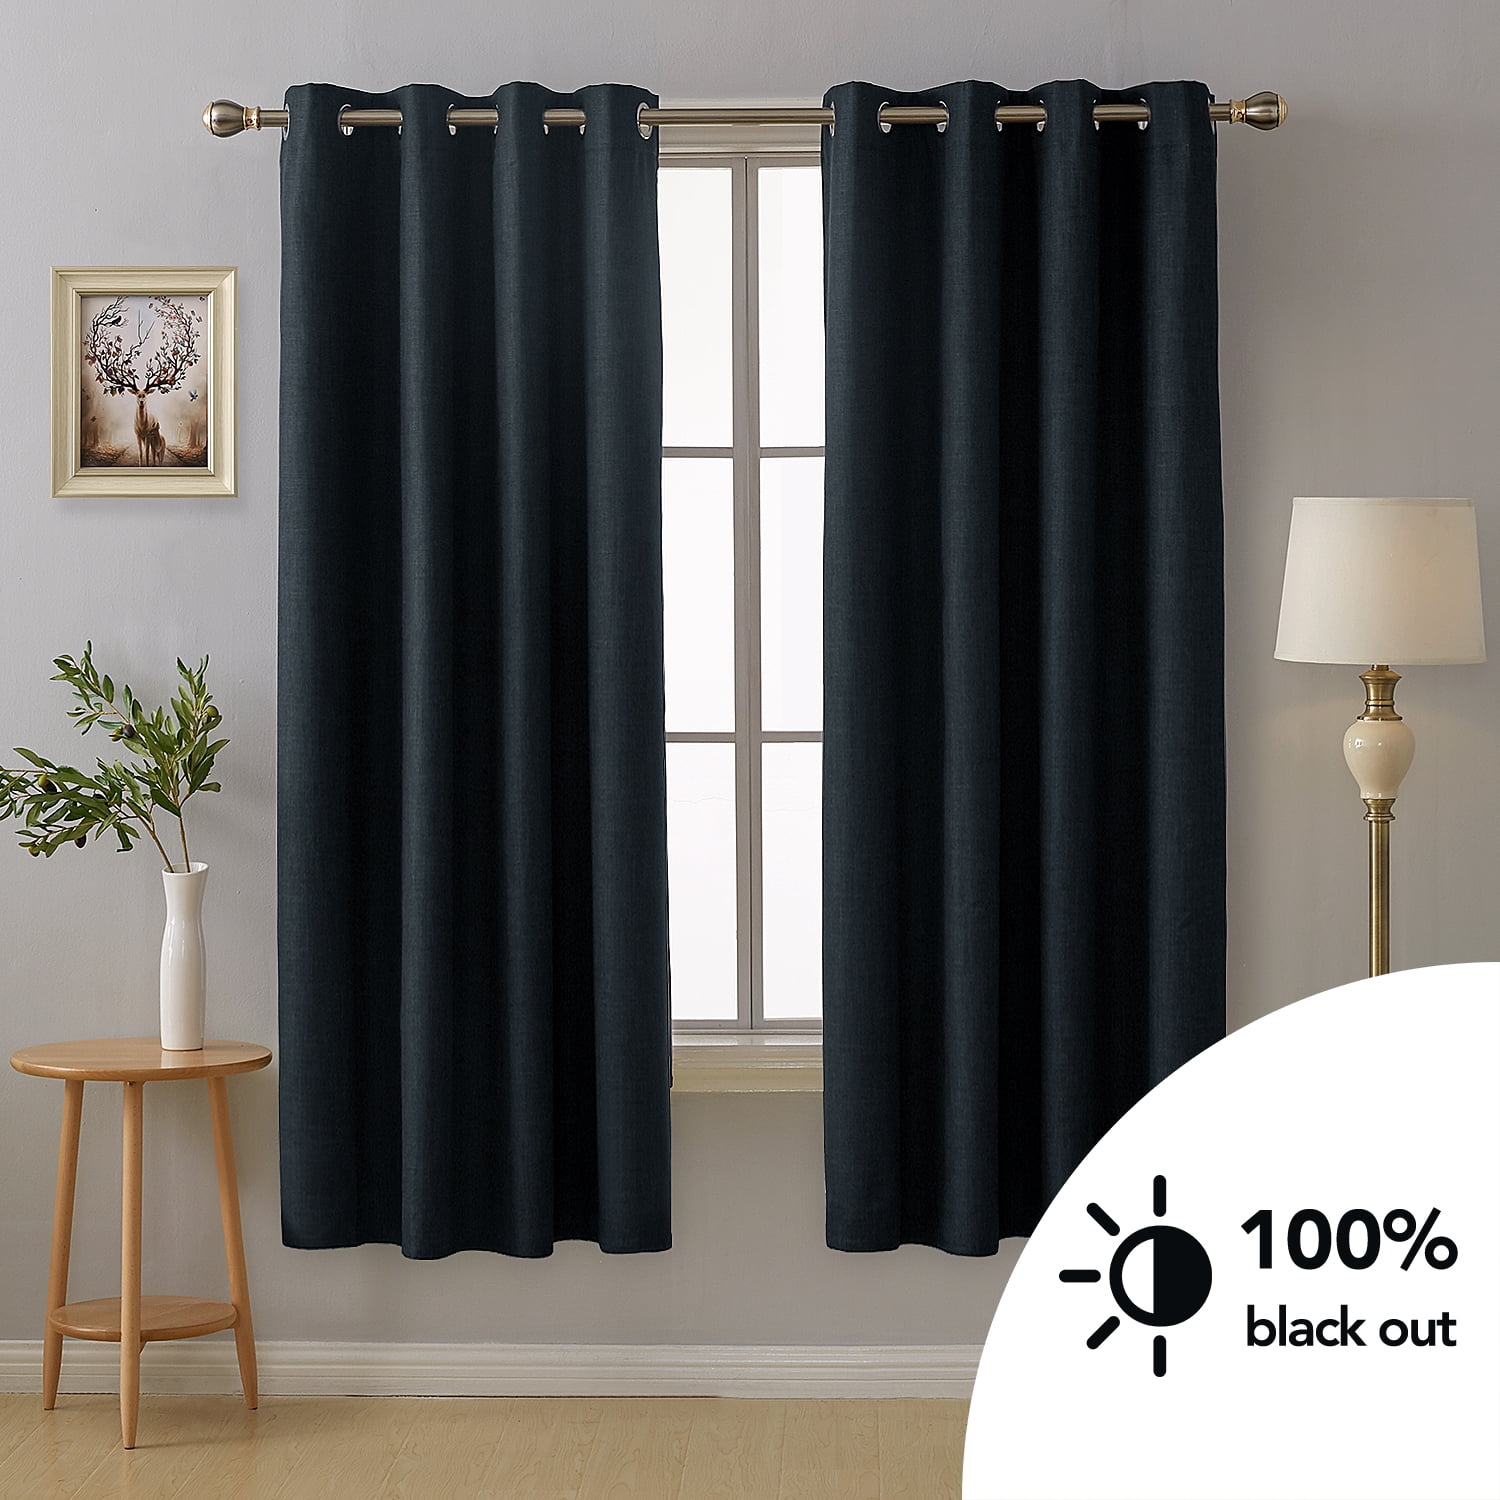 Deconovo Blackout Curtains for Bedroom, Silver Dots Printed